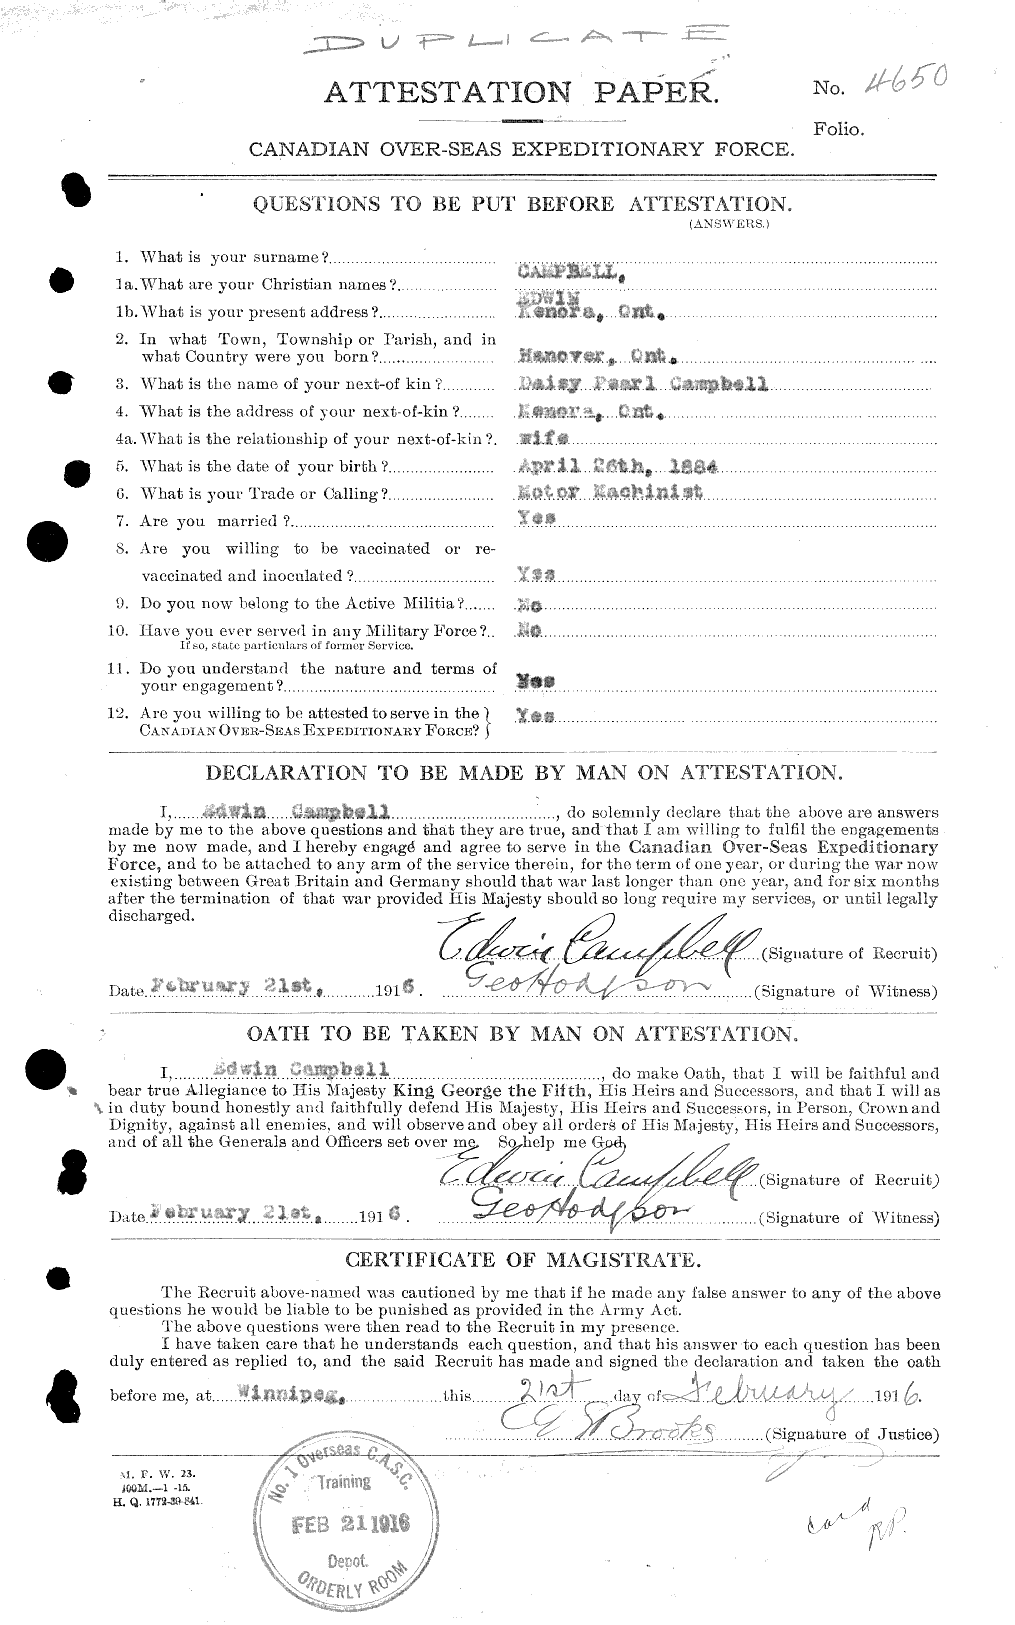 Personnel Records of the First World War - CEF 003654a